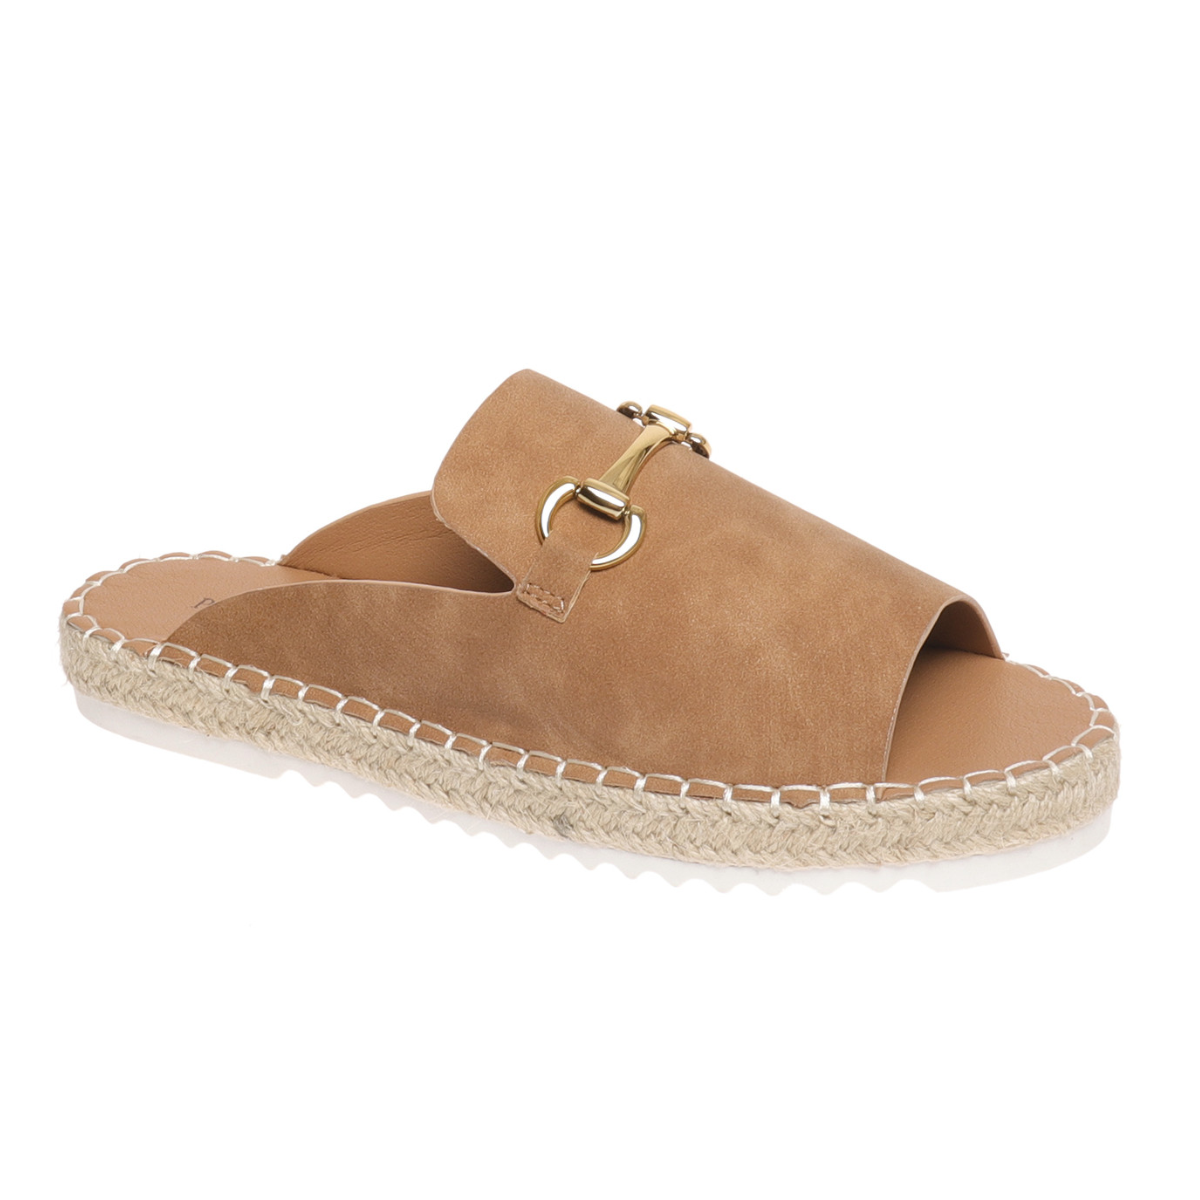 A comfy women's Cordell in New Tan espadrille with a gold buckle by OLEM SHOE CORP.